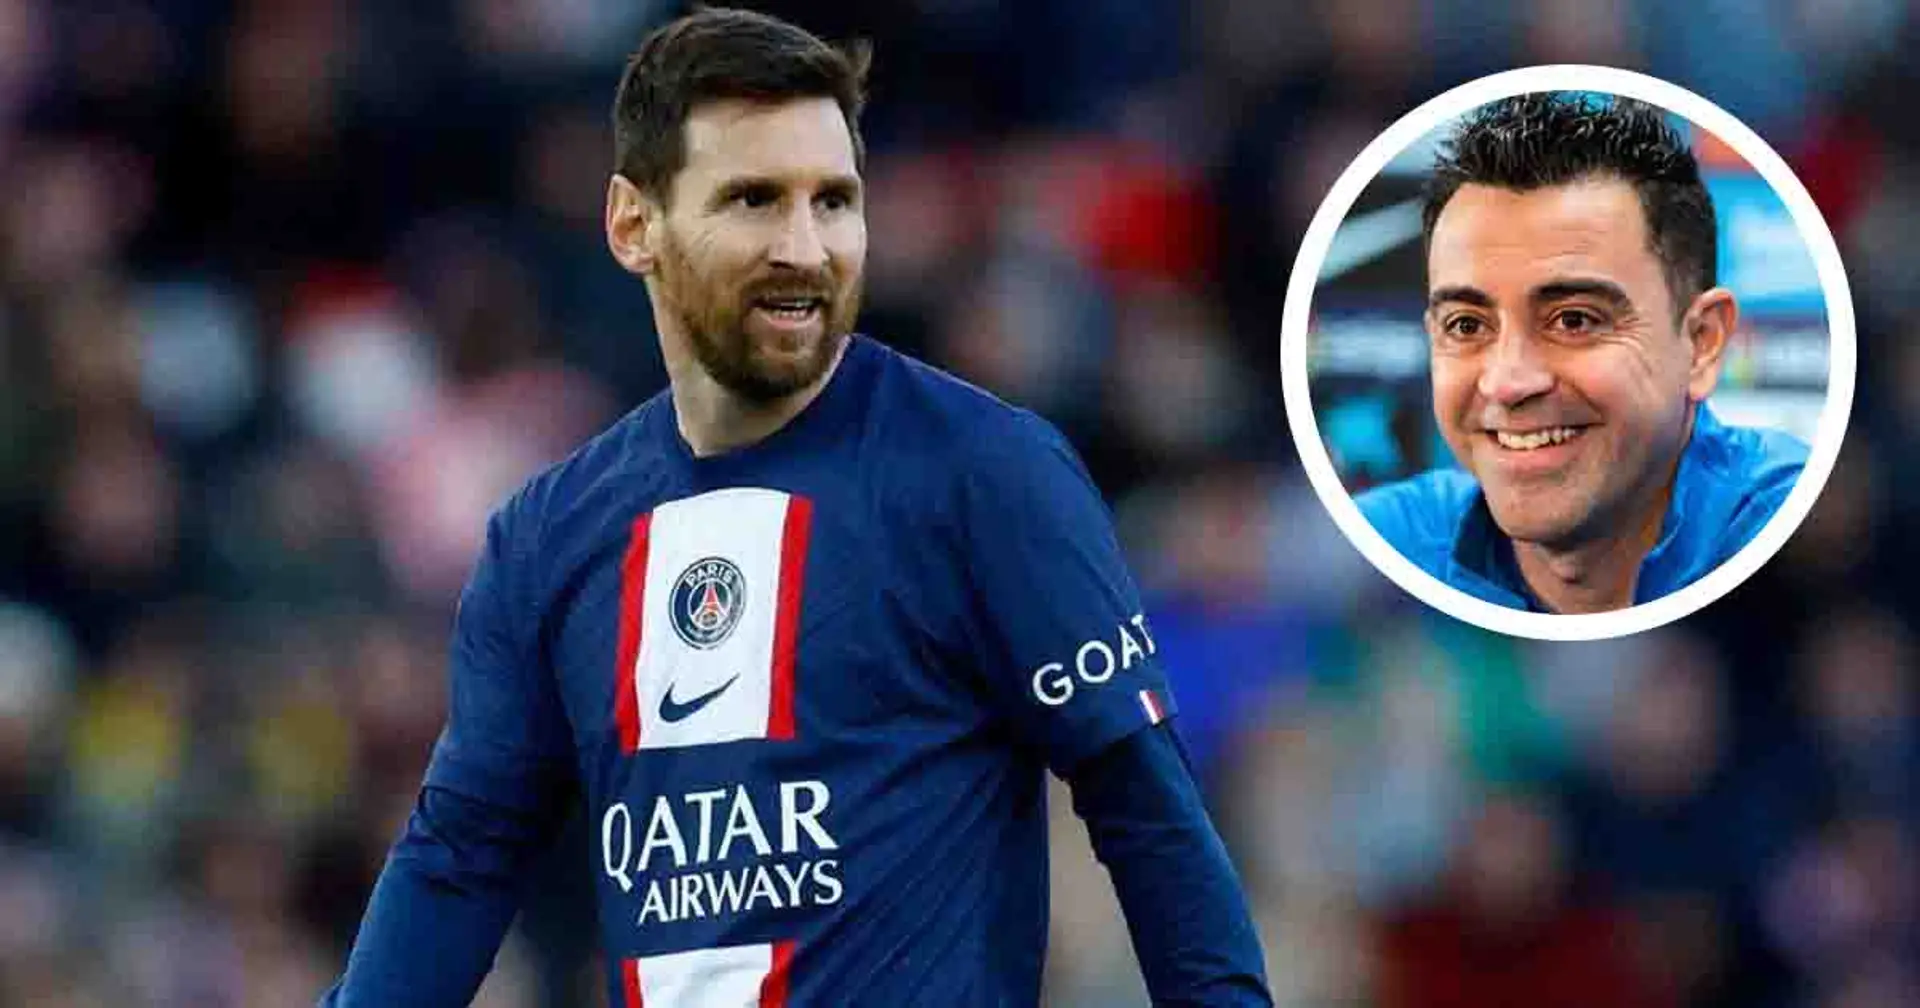 When La Liga will approve Barca's financial viability plan to bring back Messi revealed